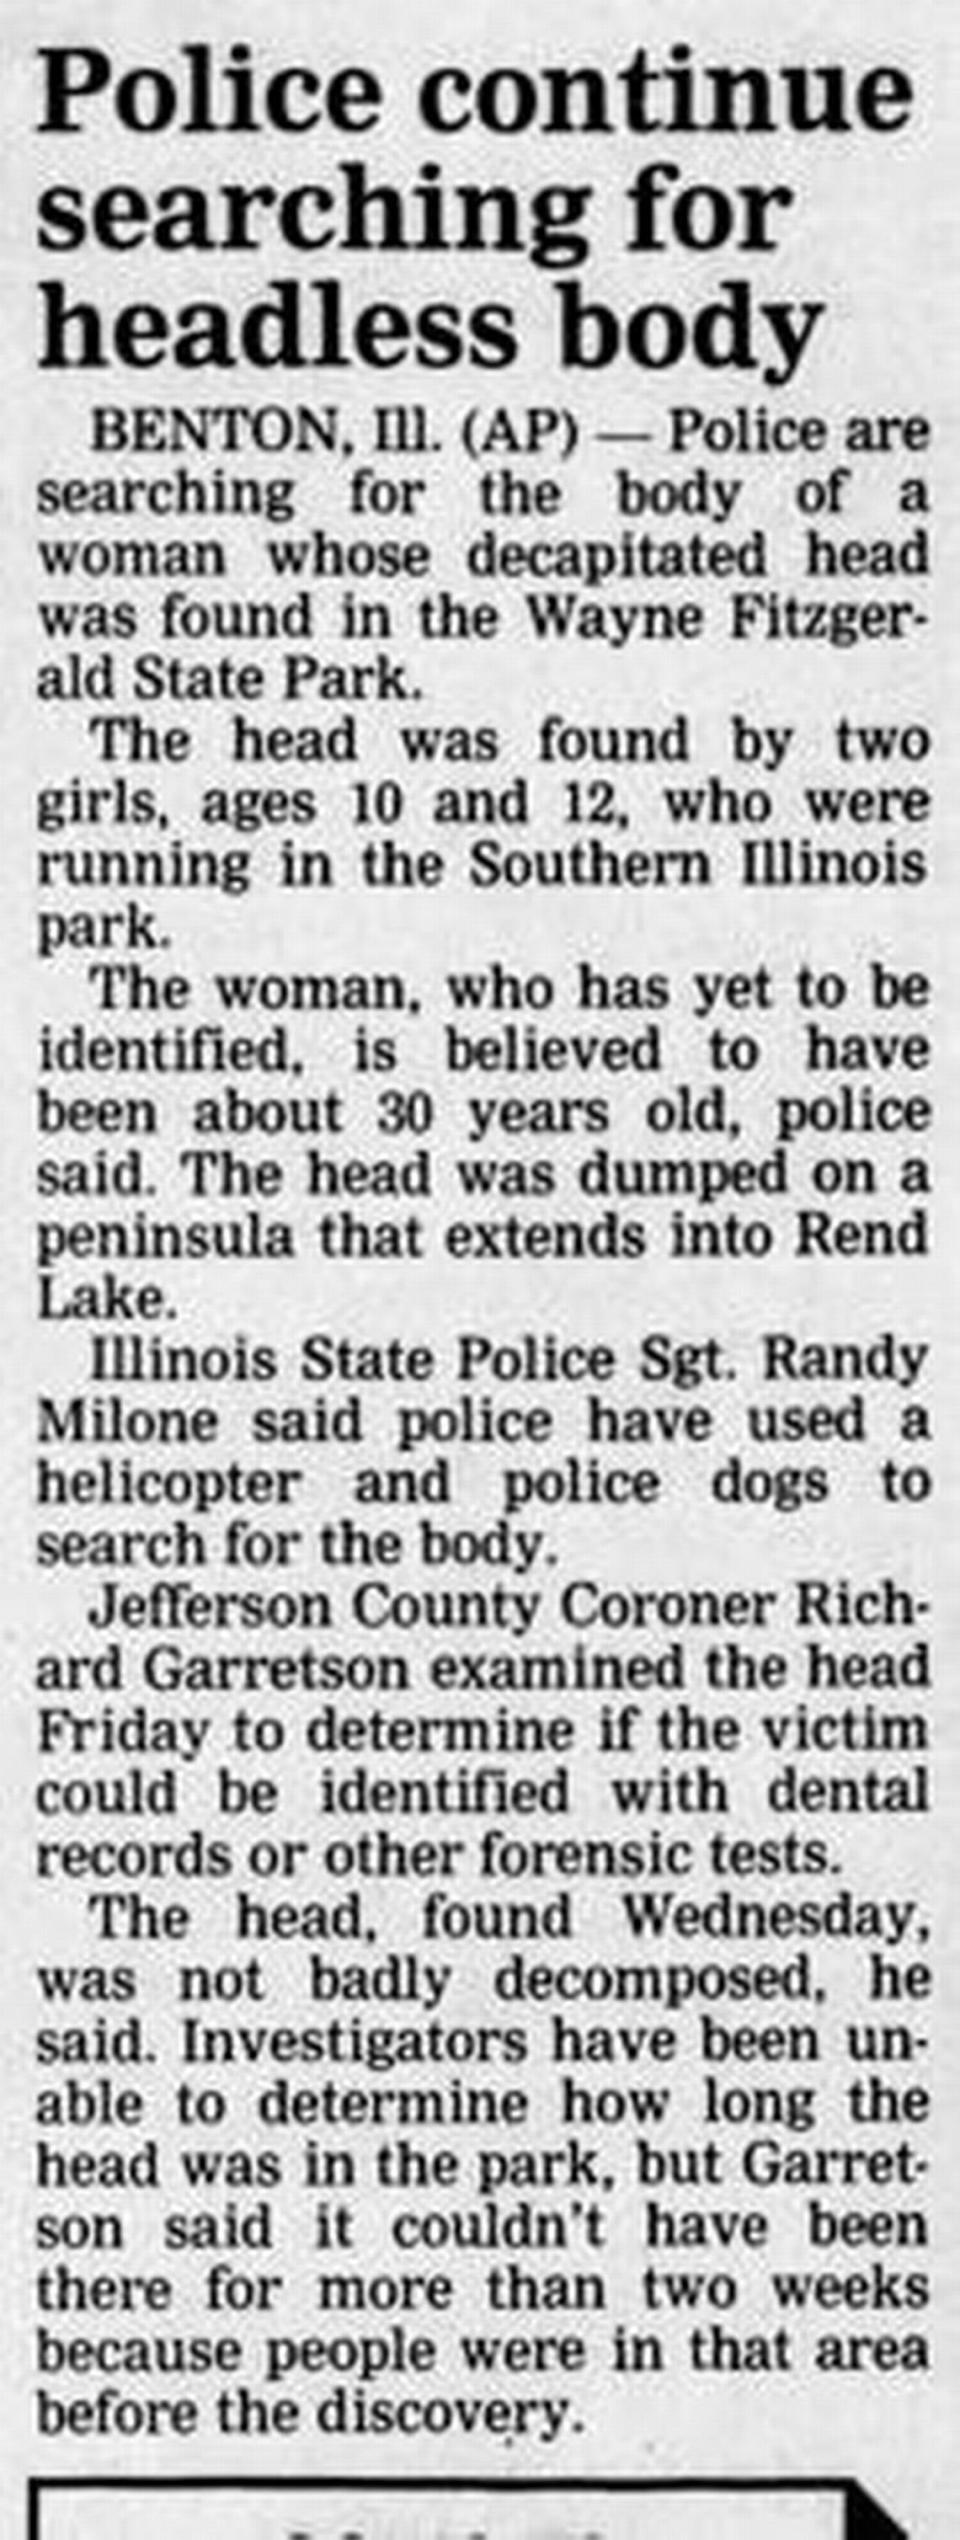 An original Associated Press article published in the St. Louis Post-Dispatch on Jan. 31, 1993.